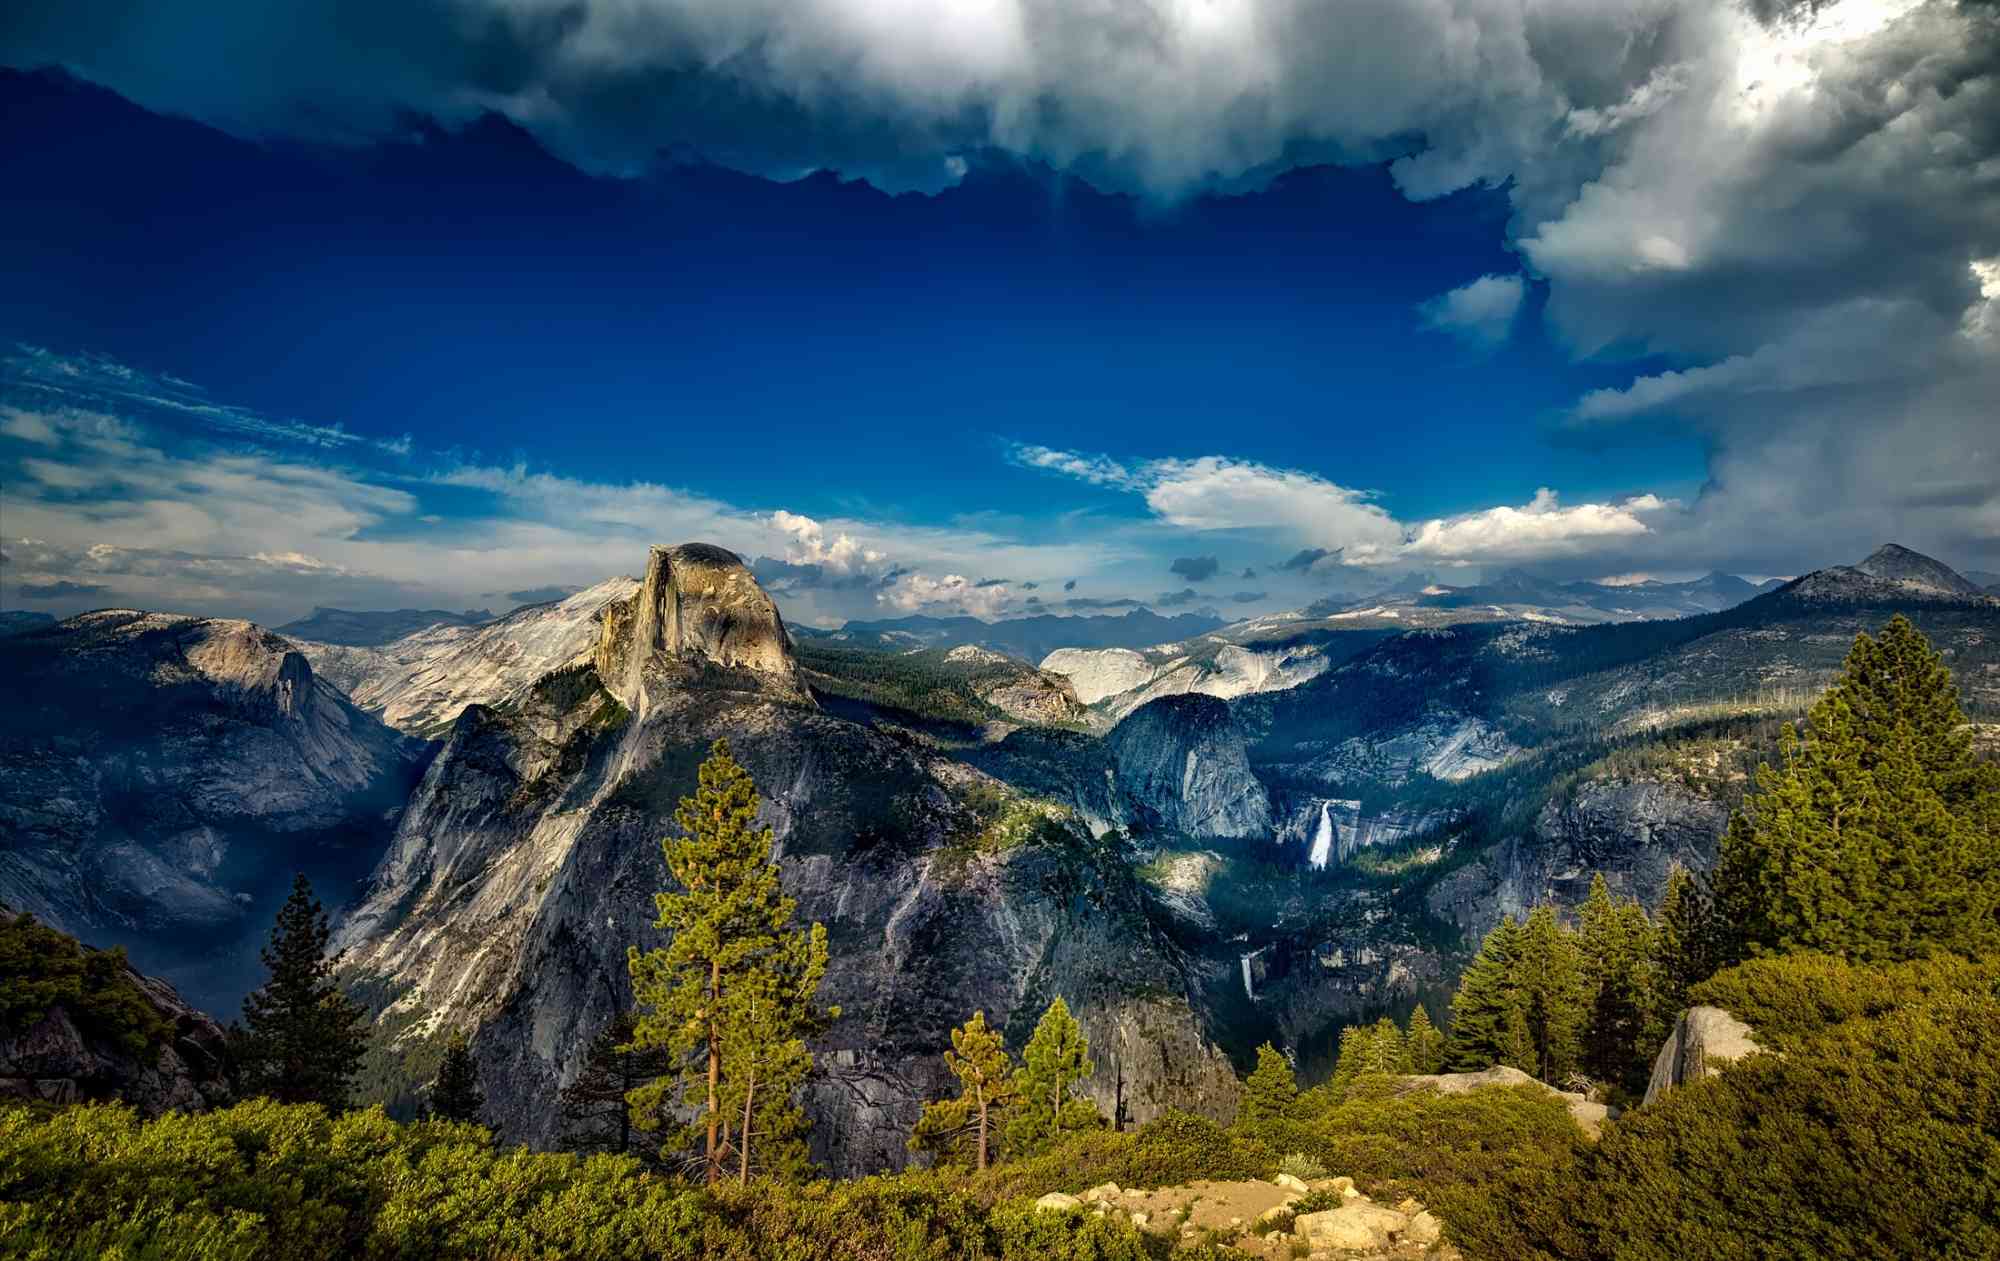 Clouds in a blue sky over Yosemite National Park, California